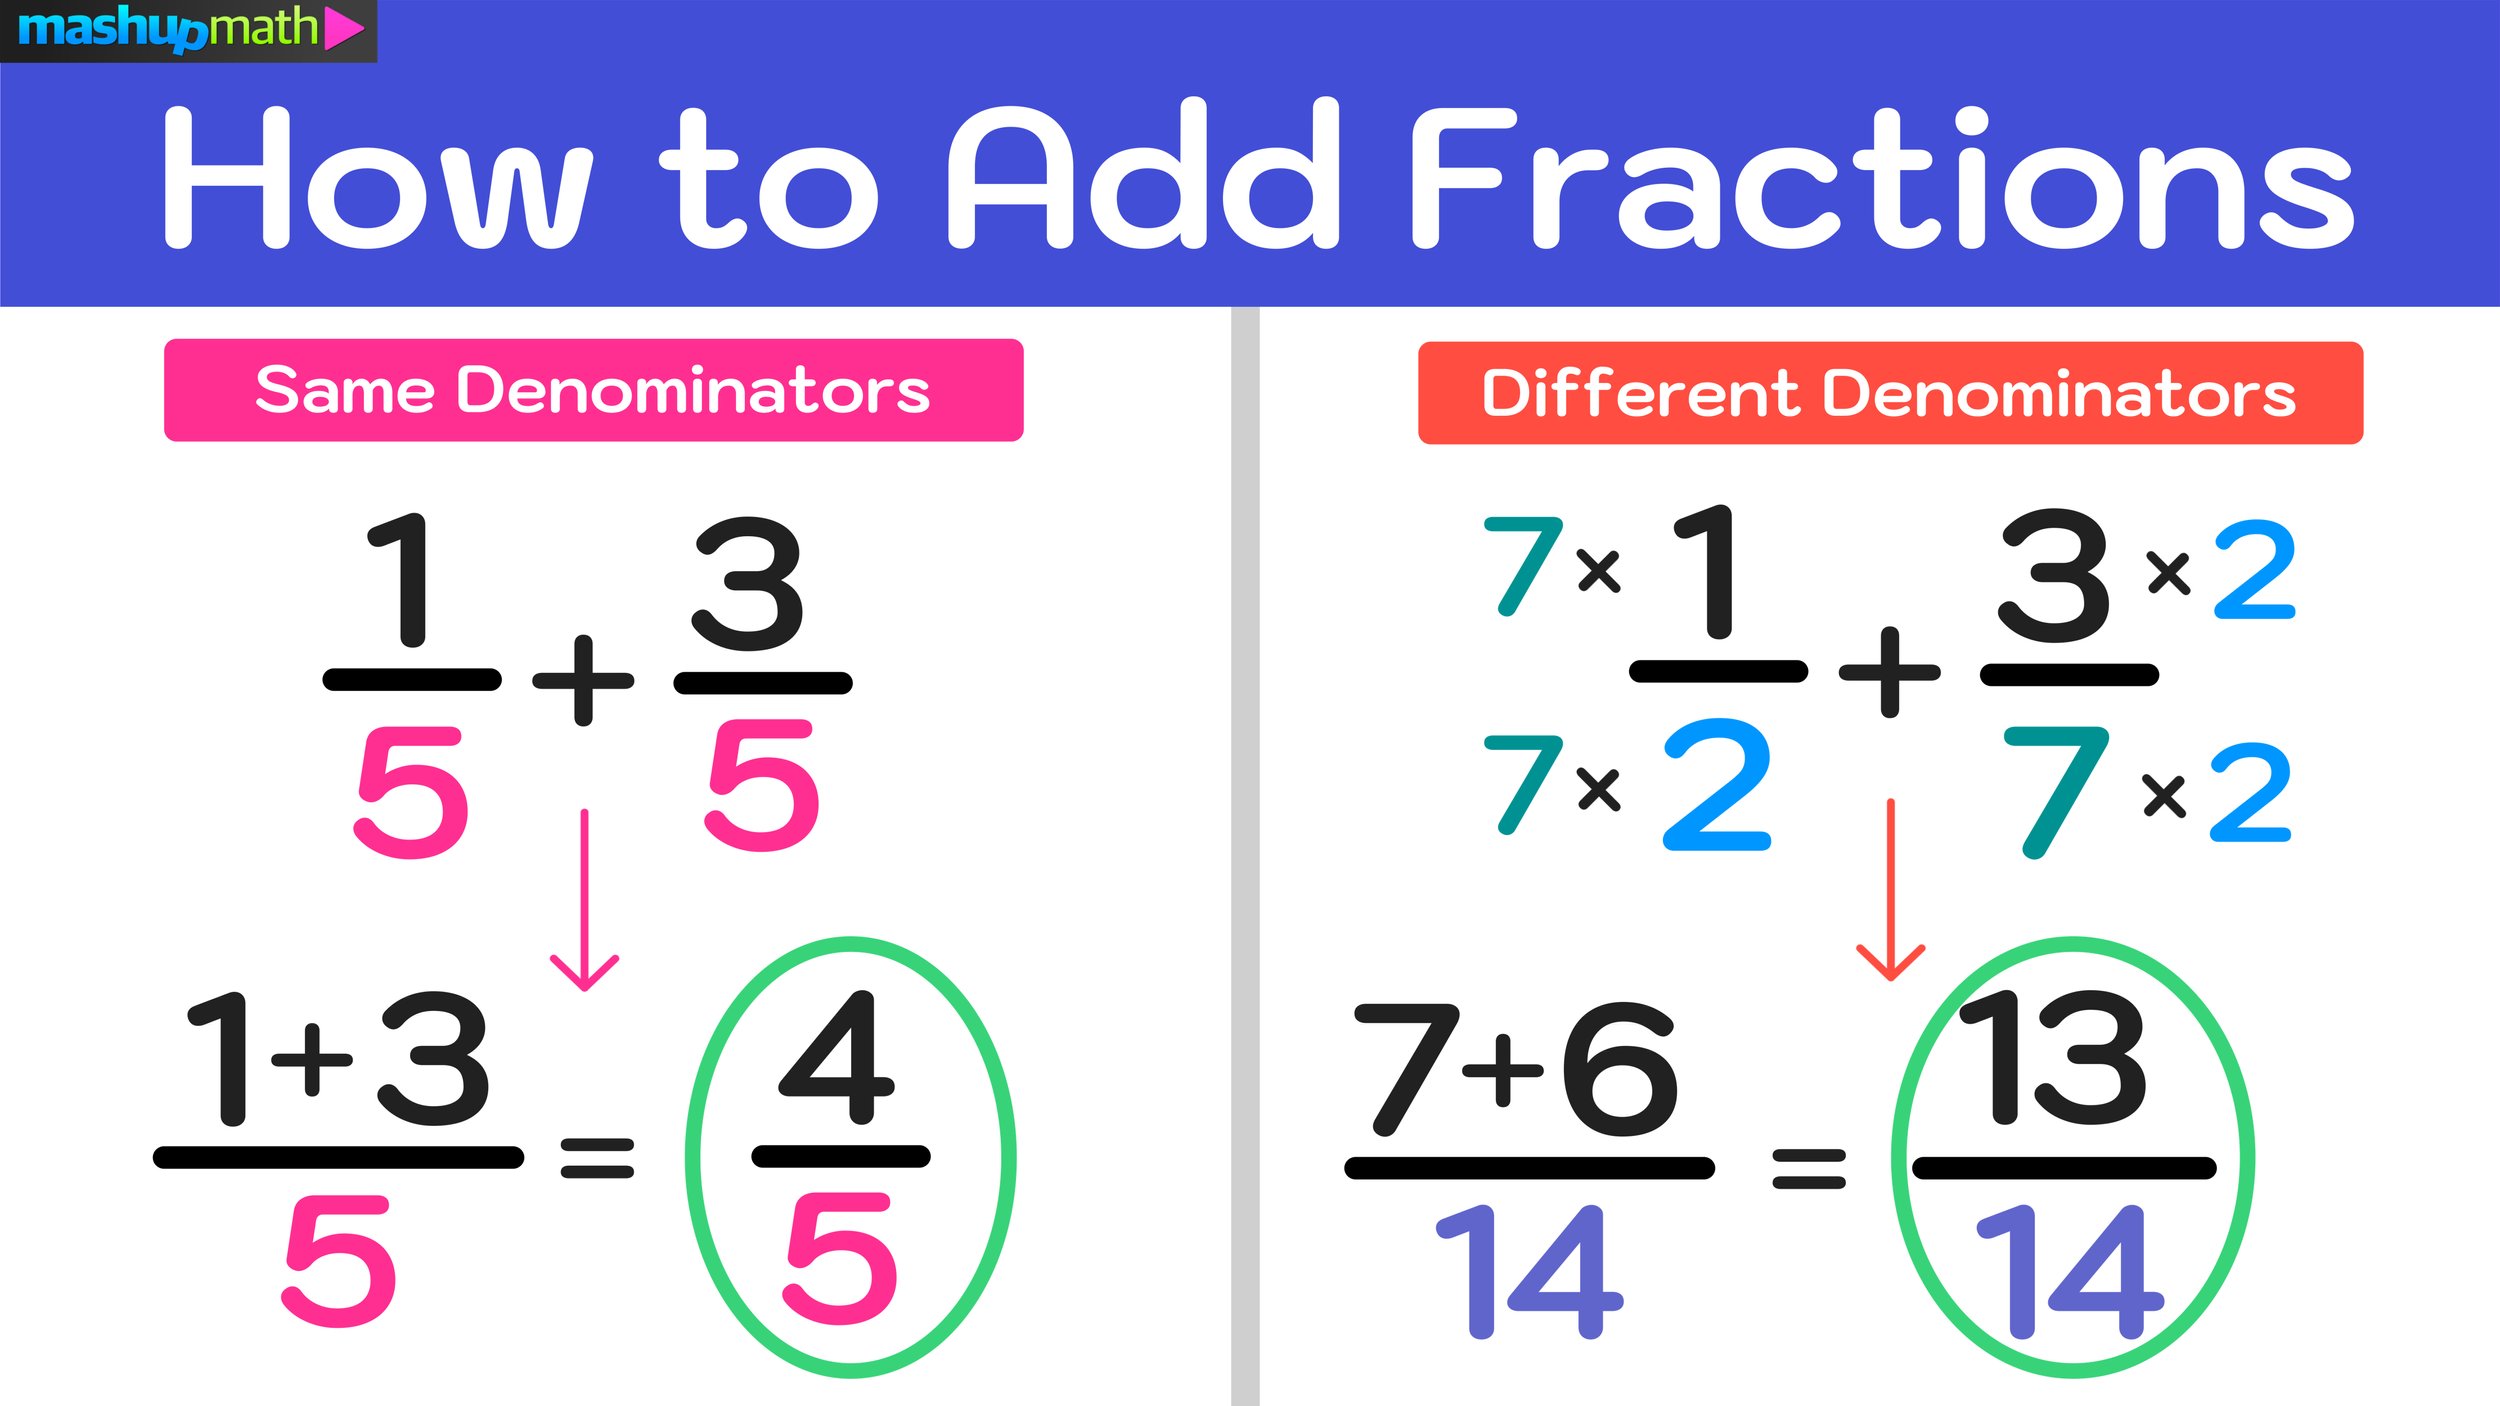 how-to-add-fractions-in-3-easy-steps-mashup-math